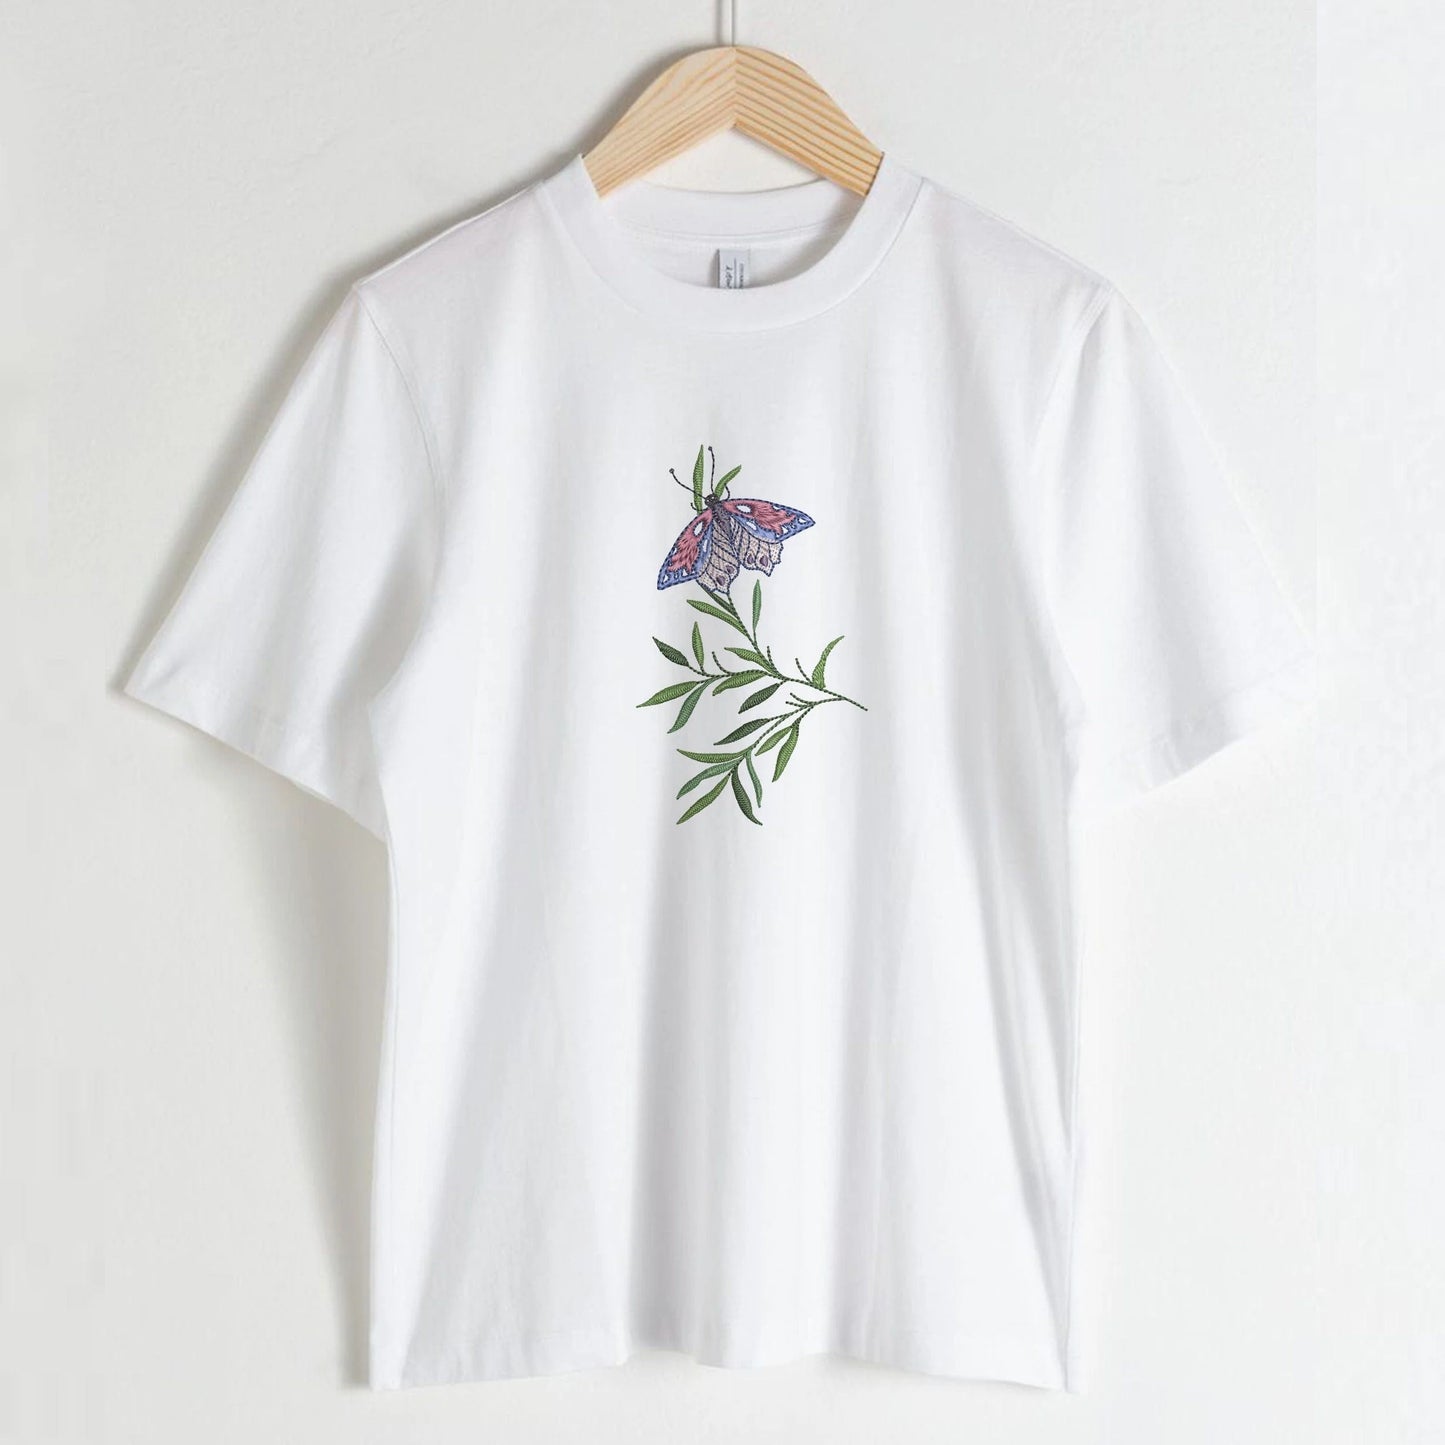 Beautiful Flower Butterfly Machine Embroidery Design on t-shirt